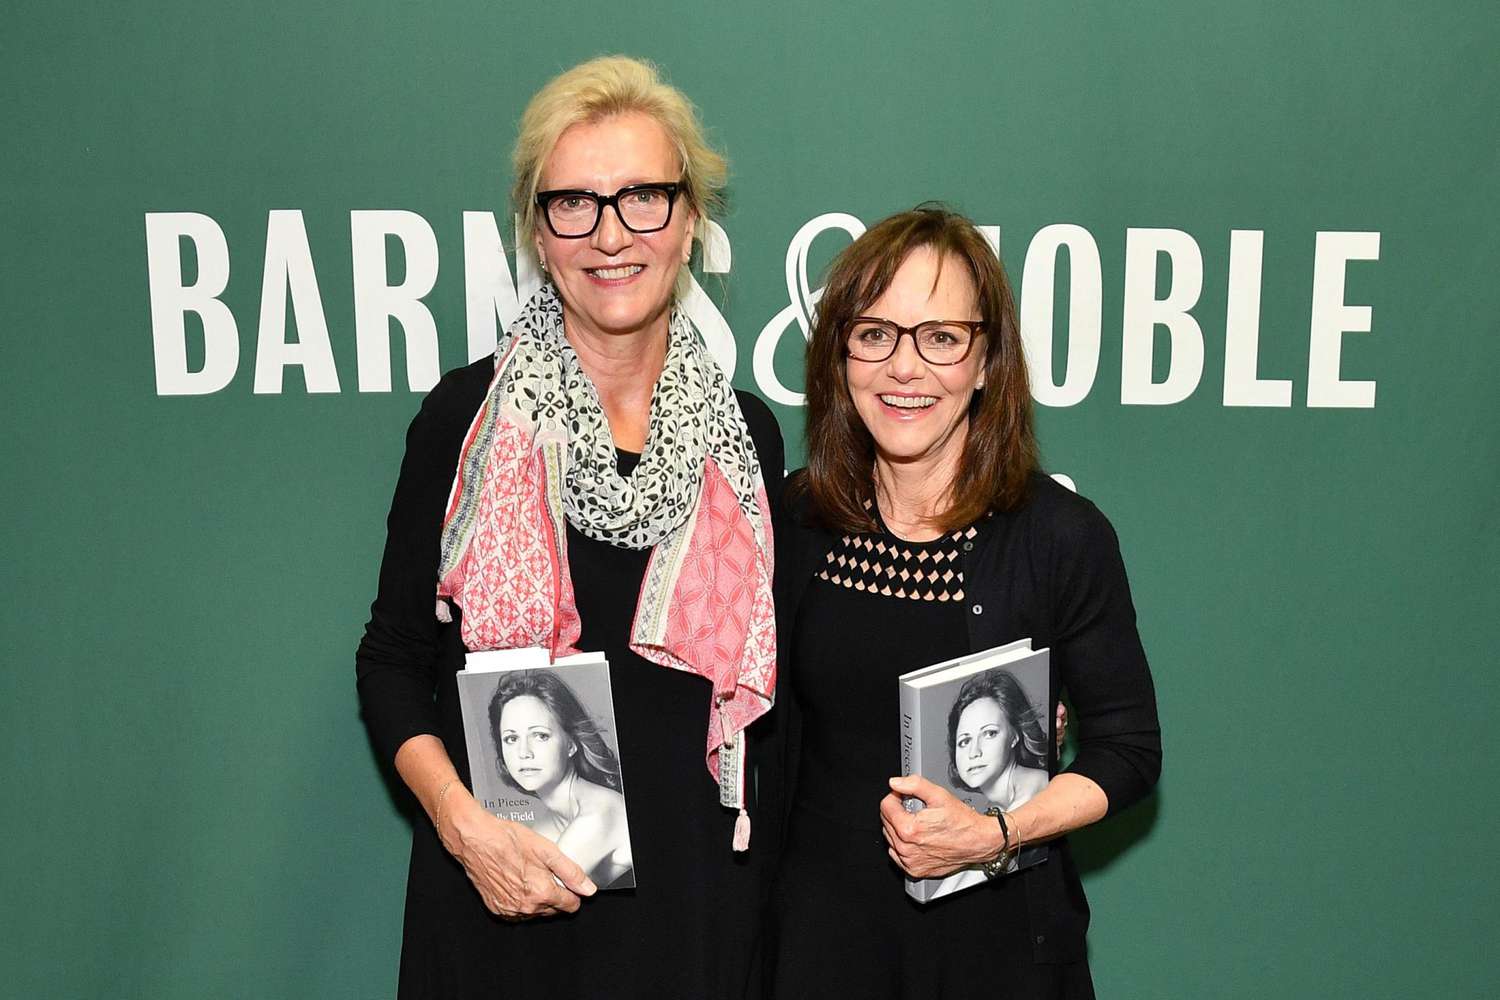 Sally Field Signs Copies Of Her New Book "In Pieces"